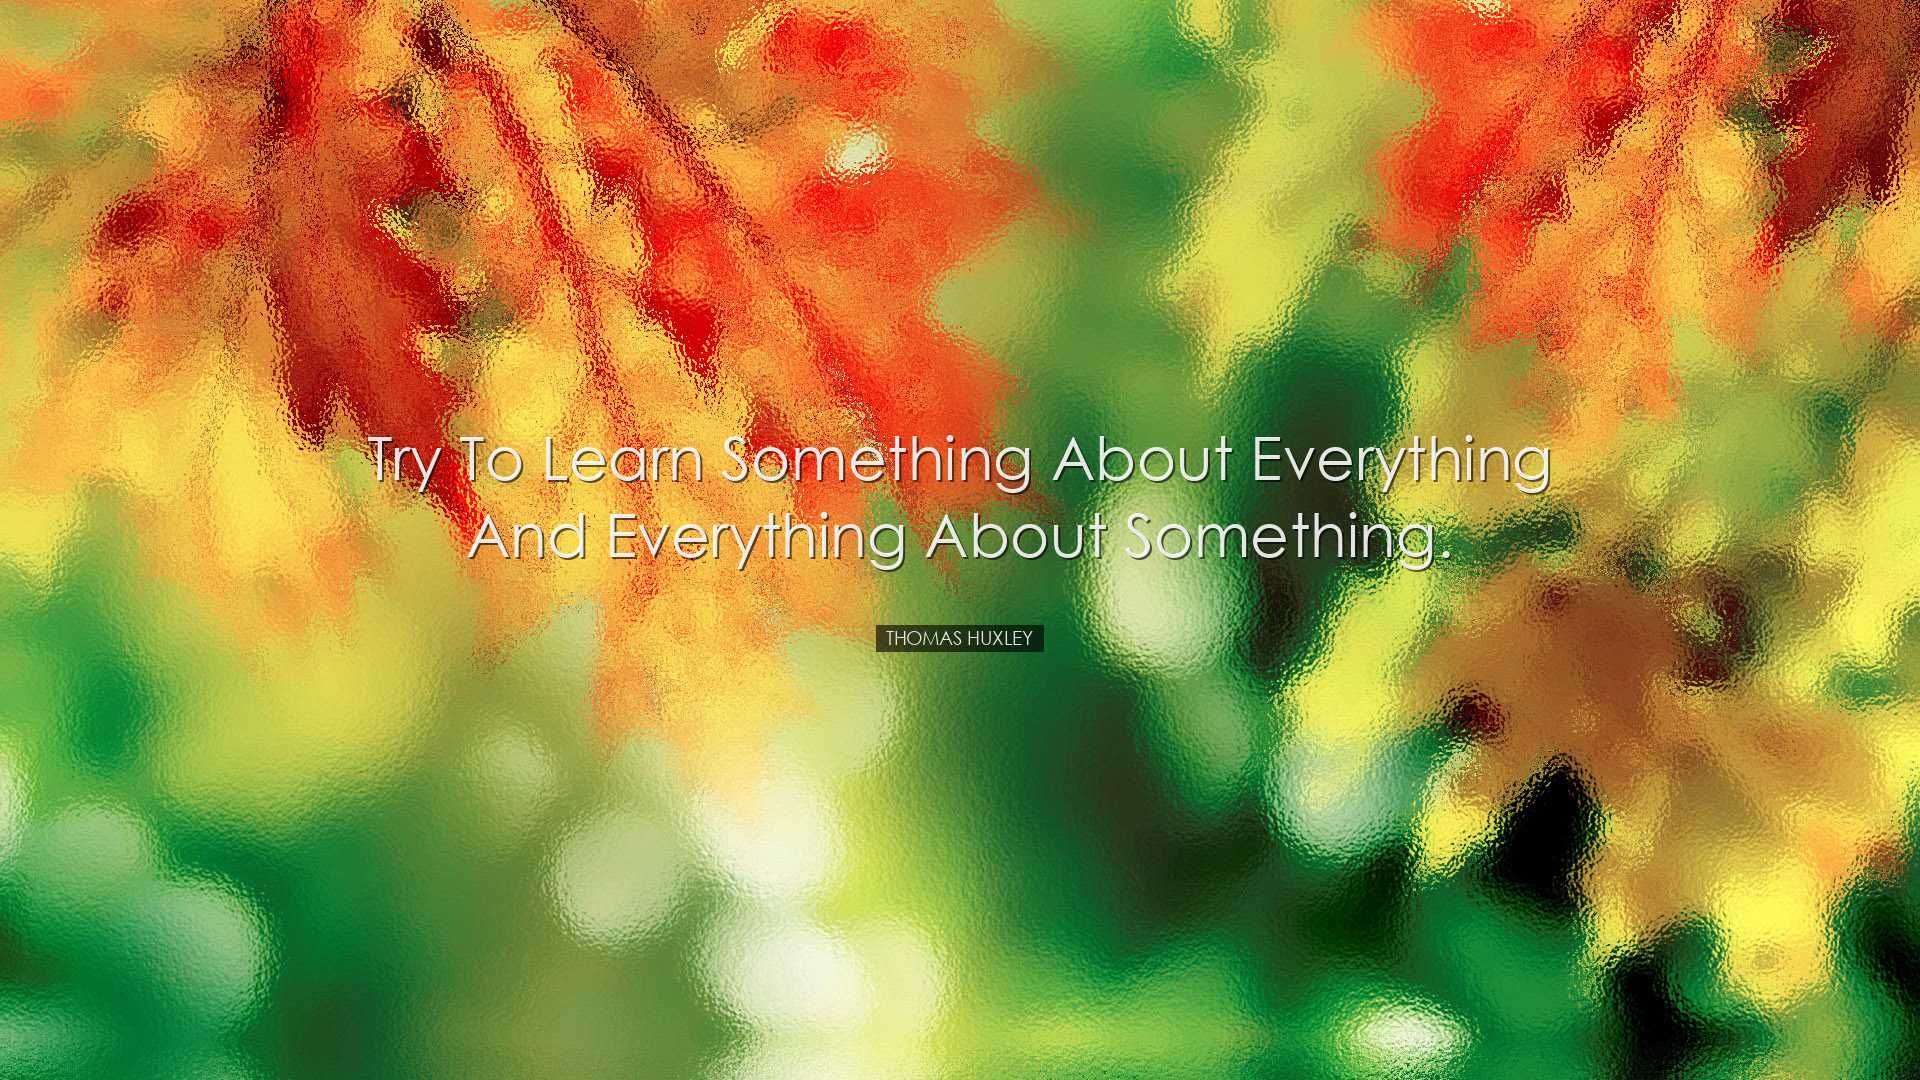 Try to learn something about everything and everything about somet